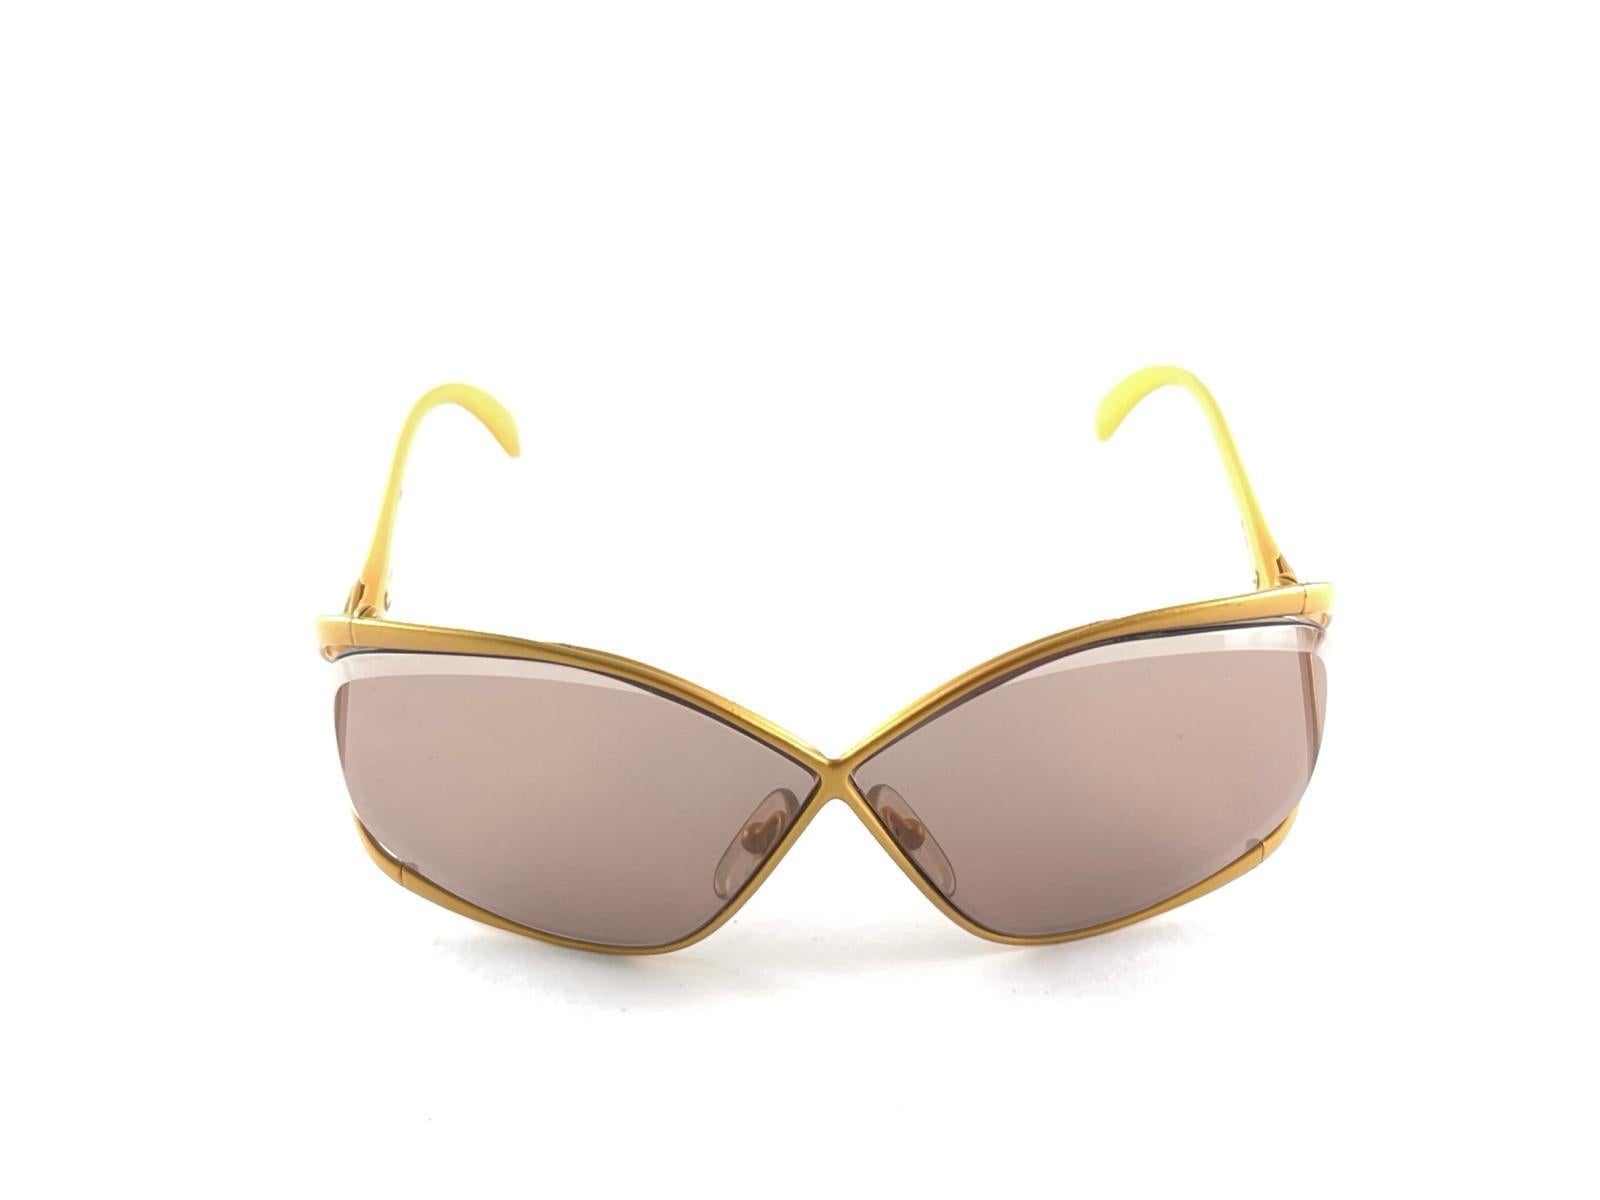 Women's New Vintage Christian Dior 2056 40 Butterfly Mustard Sunglasses Made in Germany For Sale